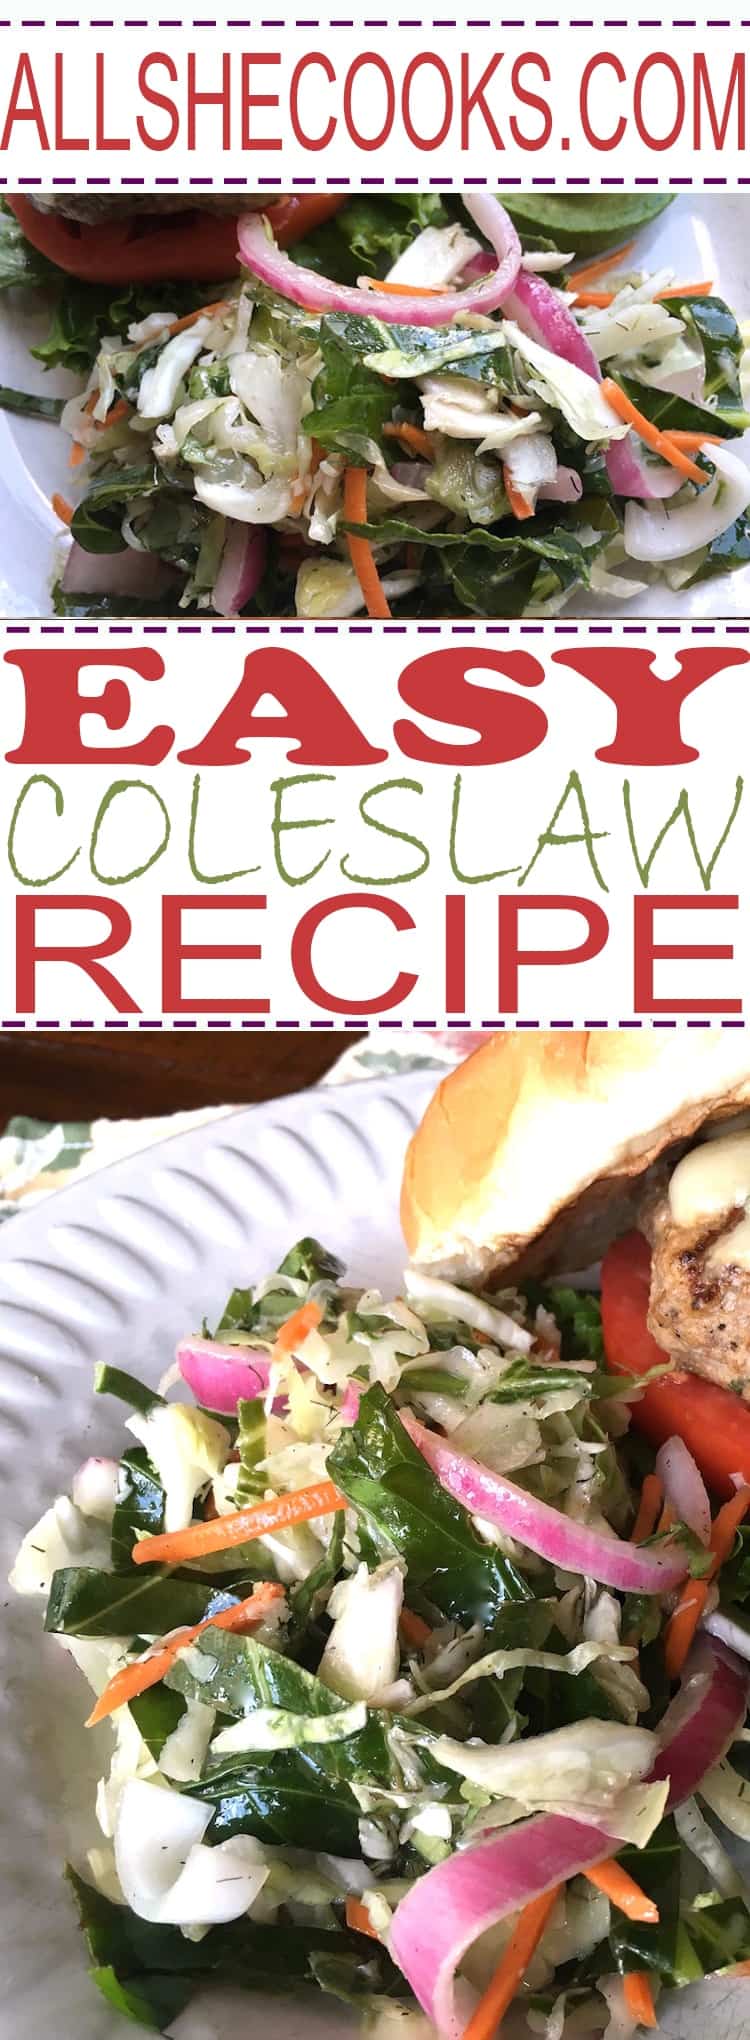 Enjoy this easy Carolina Coleslaw Recipe. It is the perfect party side dish recipe. It also makes a tasty topping to pulled chicken or pulled pork sandwiches.